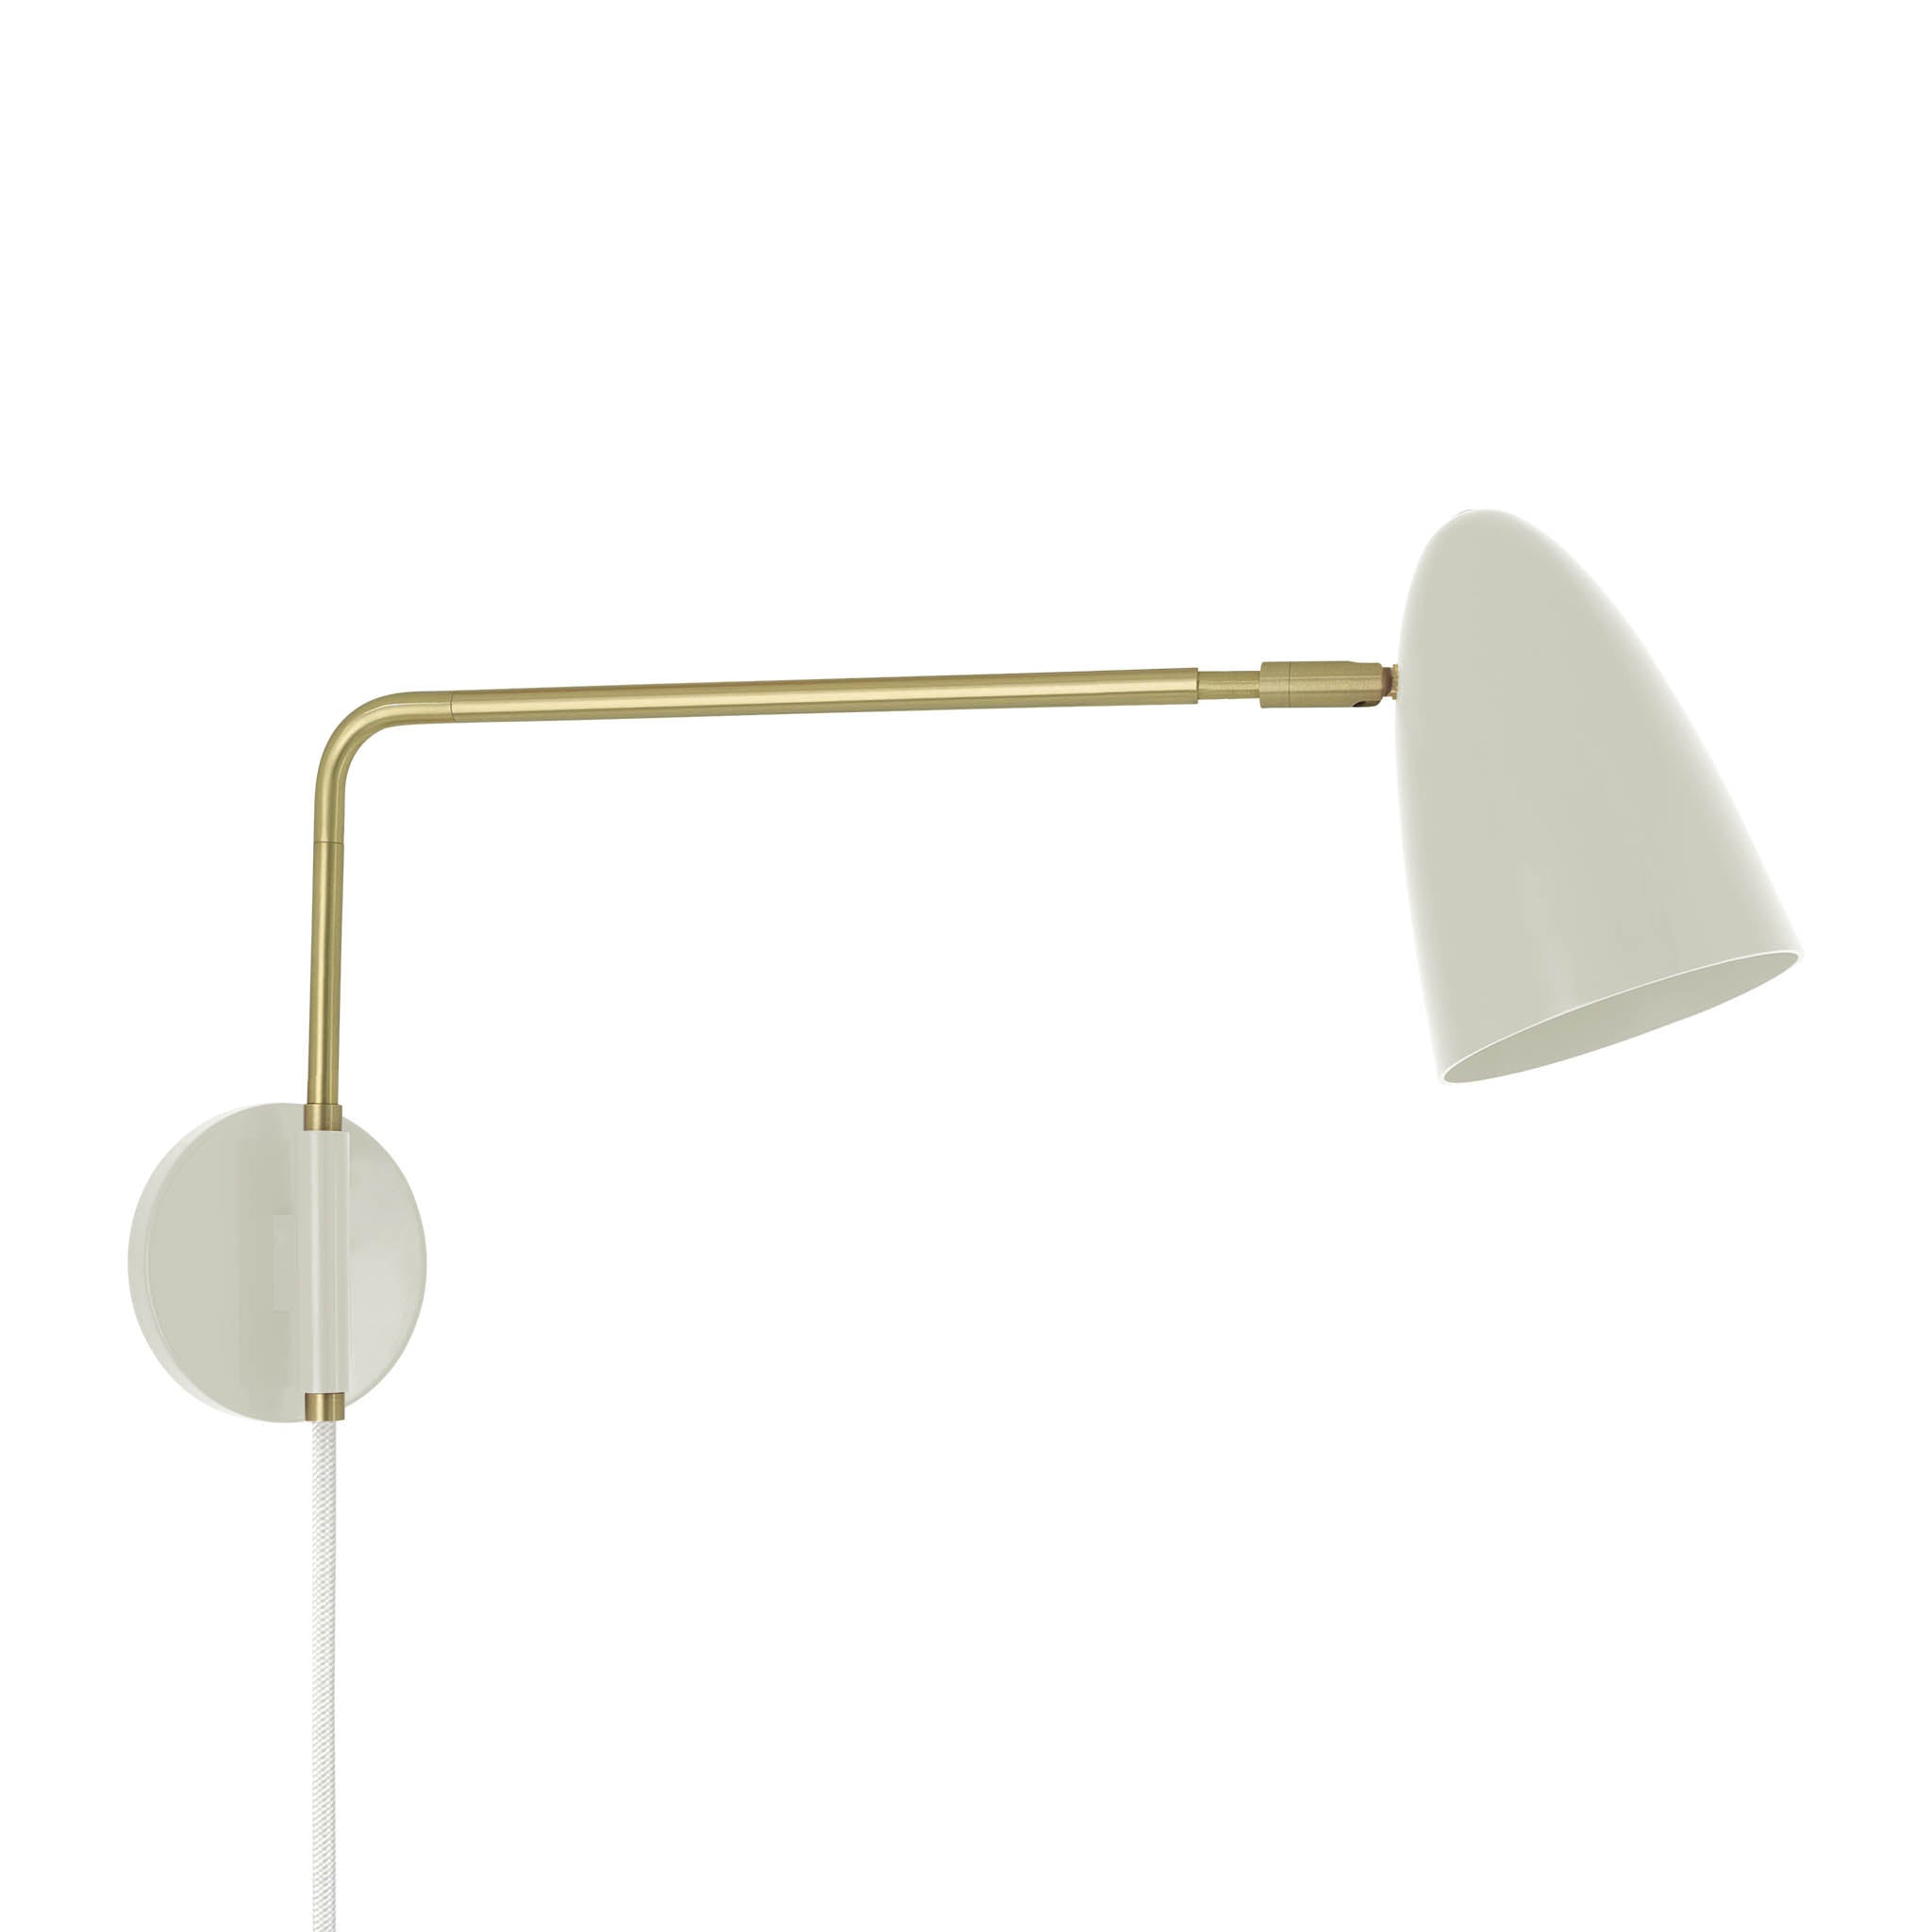 Brass and bone color Boom Swing Arm plug-in sconce Dutton Brown lighting